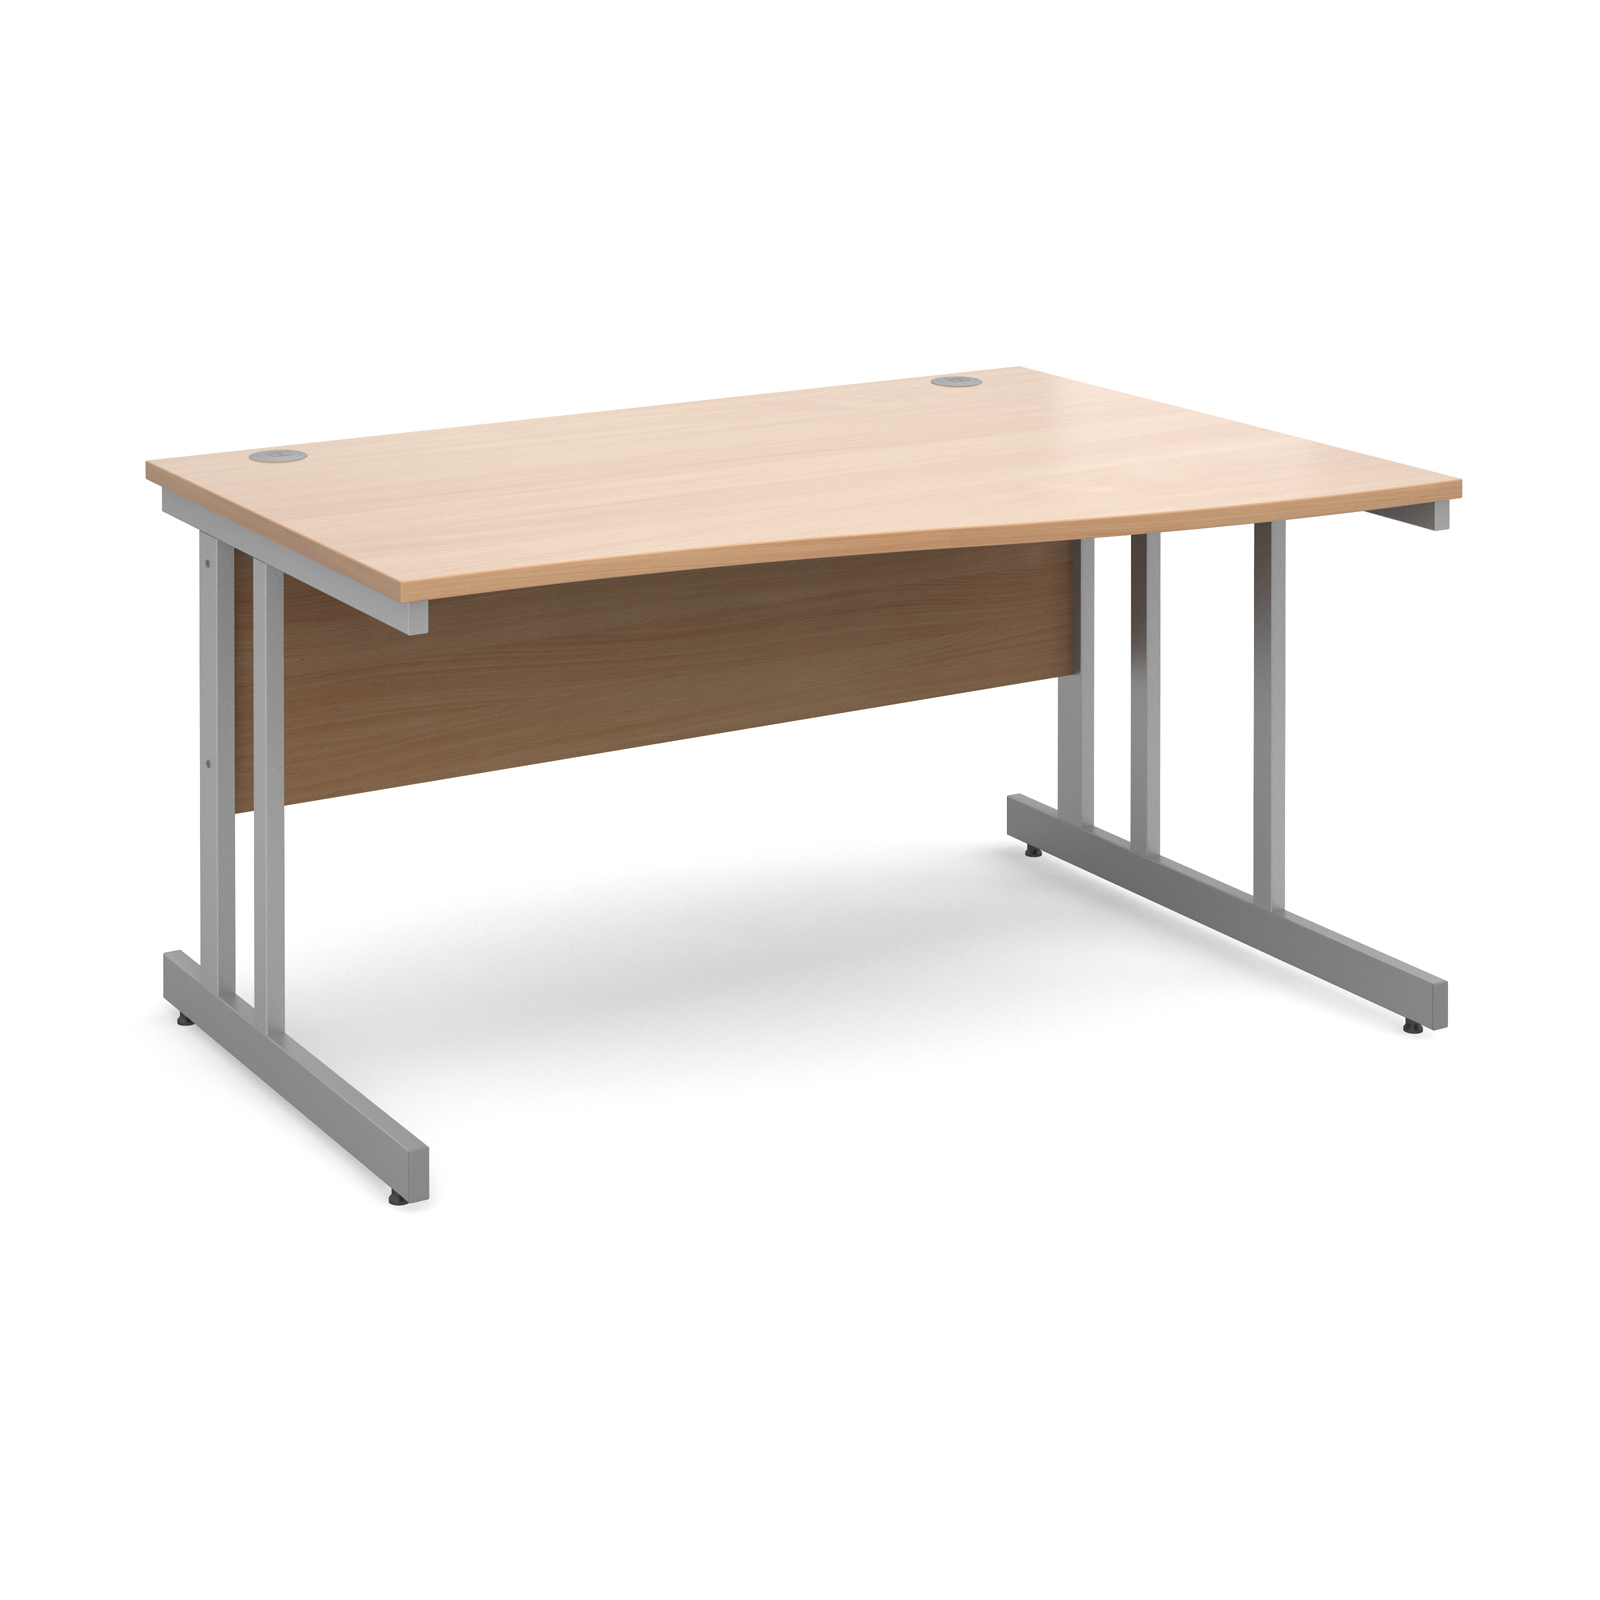 Momento right hand wave desk 1400mm - silver cantilever frame, beech top